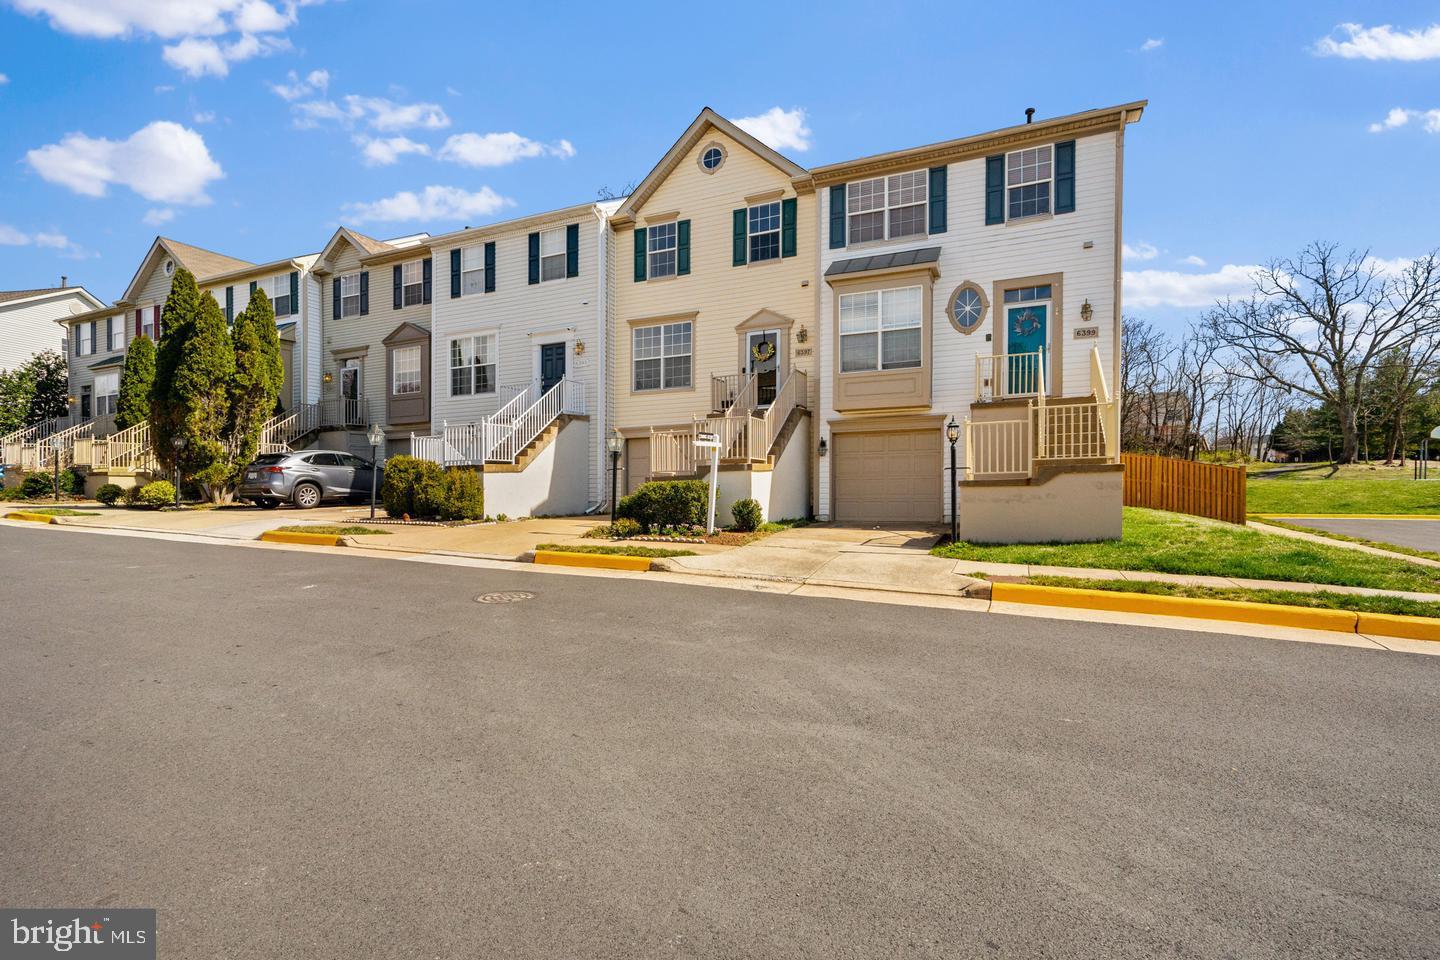 View Centreville, VA 20121 townhome